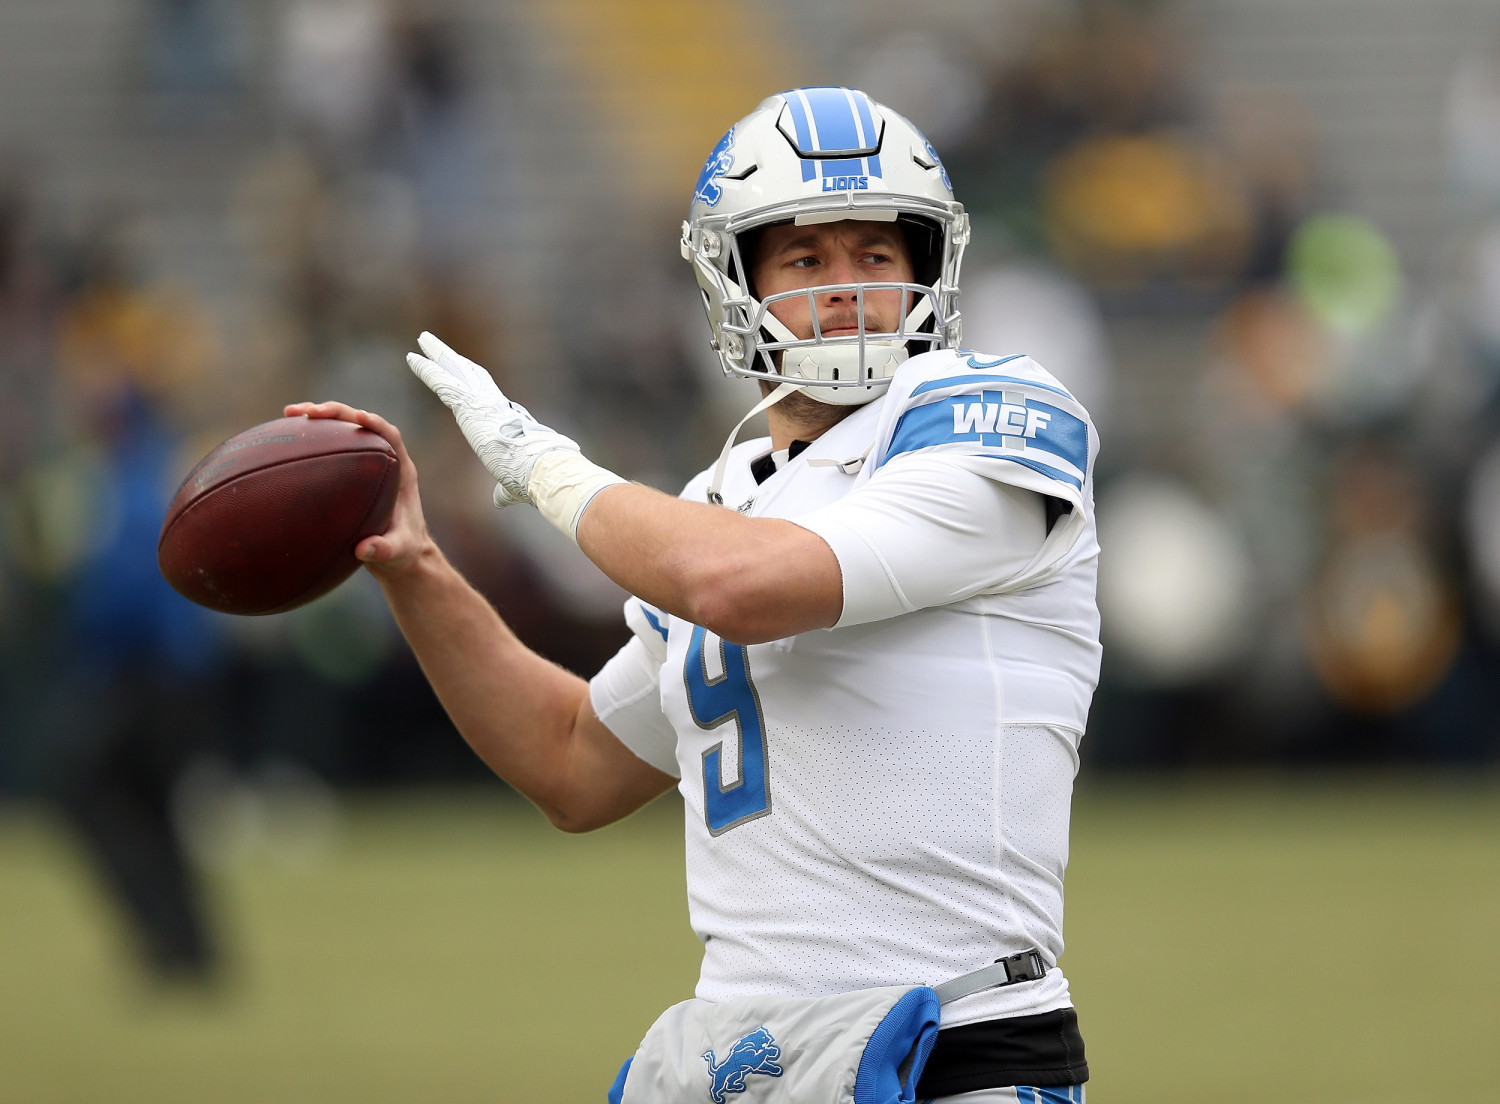 Wife of Lions QB Matthew Stafford Says She’s Having Brain Surgery to Remove Tumor